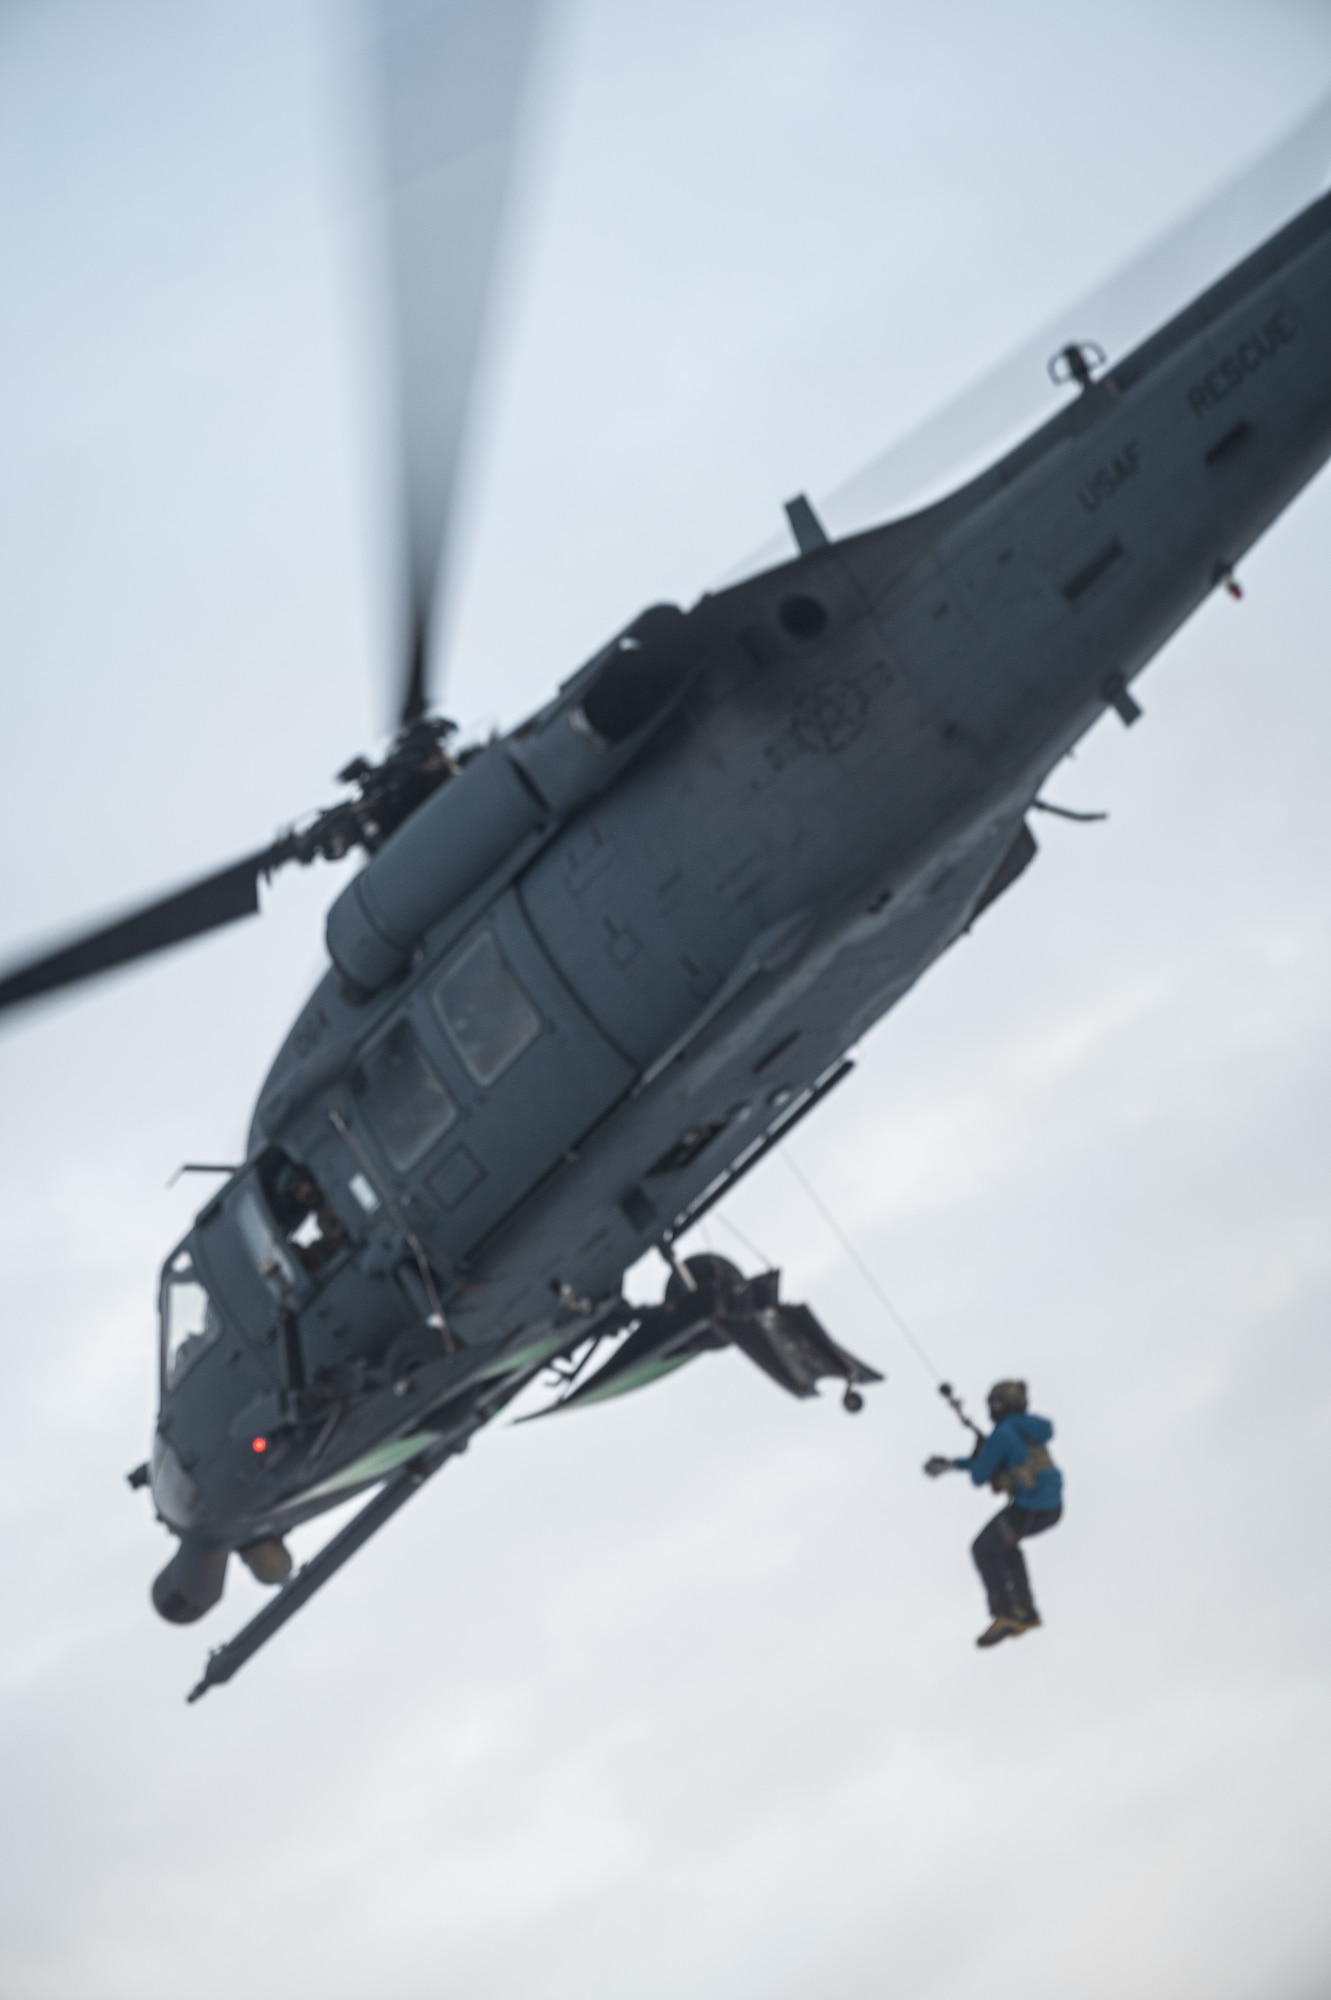 A U.S. Air Force pararescueman assigned to the 210th Rescue Squadron gets hoisted during a recovery exercise on Eielson Air Force Base, Alaska, Nov. 18, 2021.